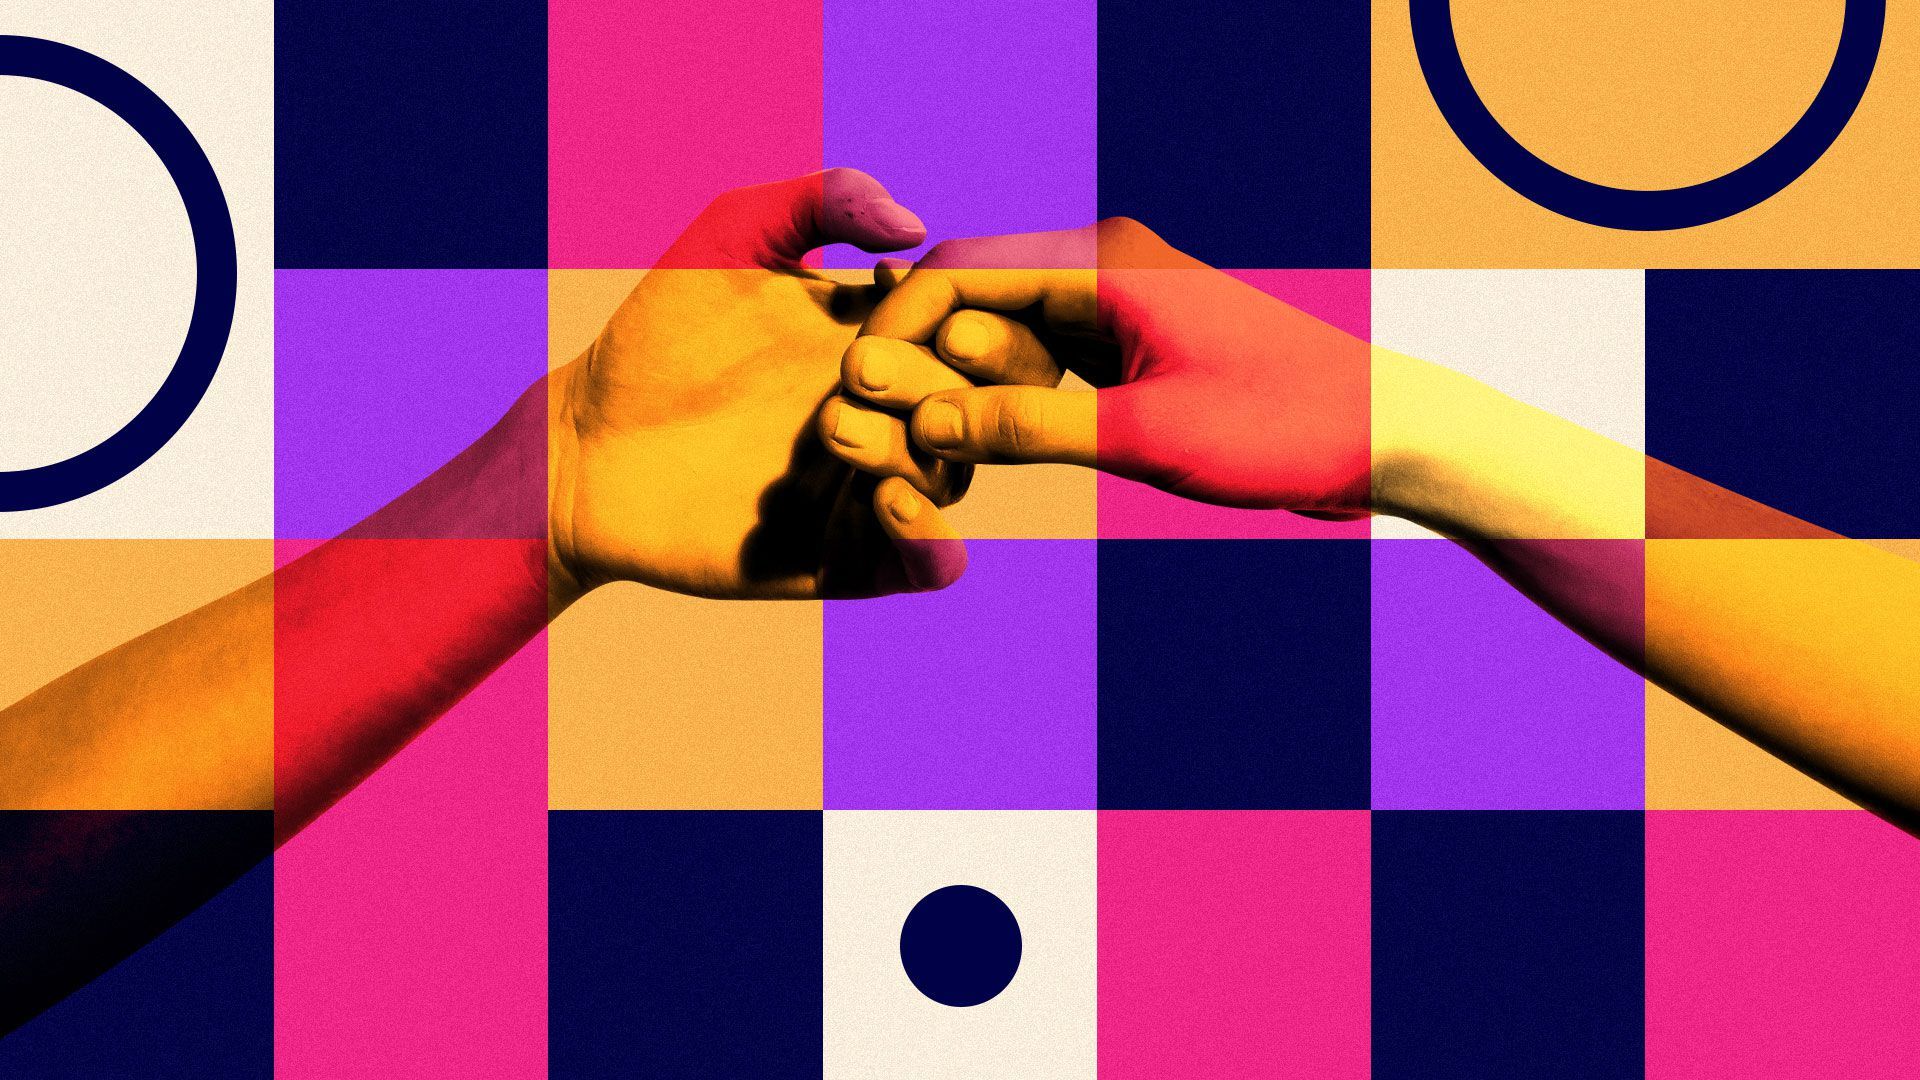 Illustration of holding hands with a grid background and circles